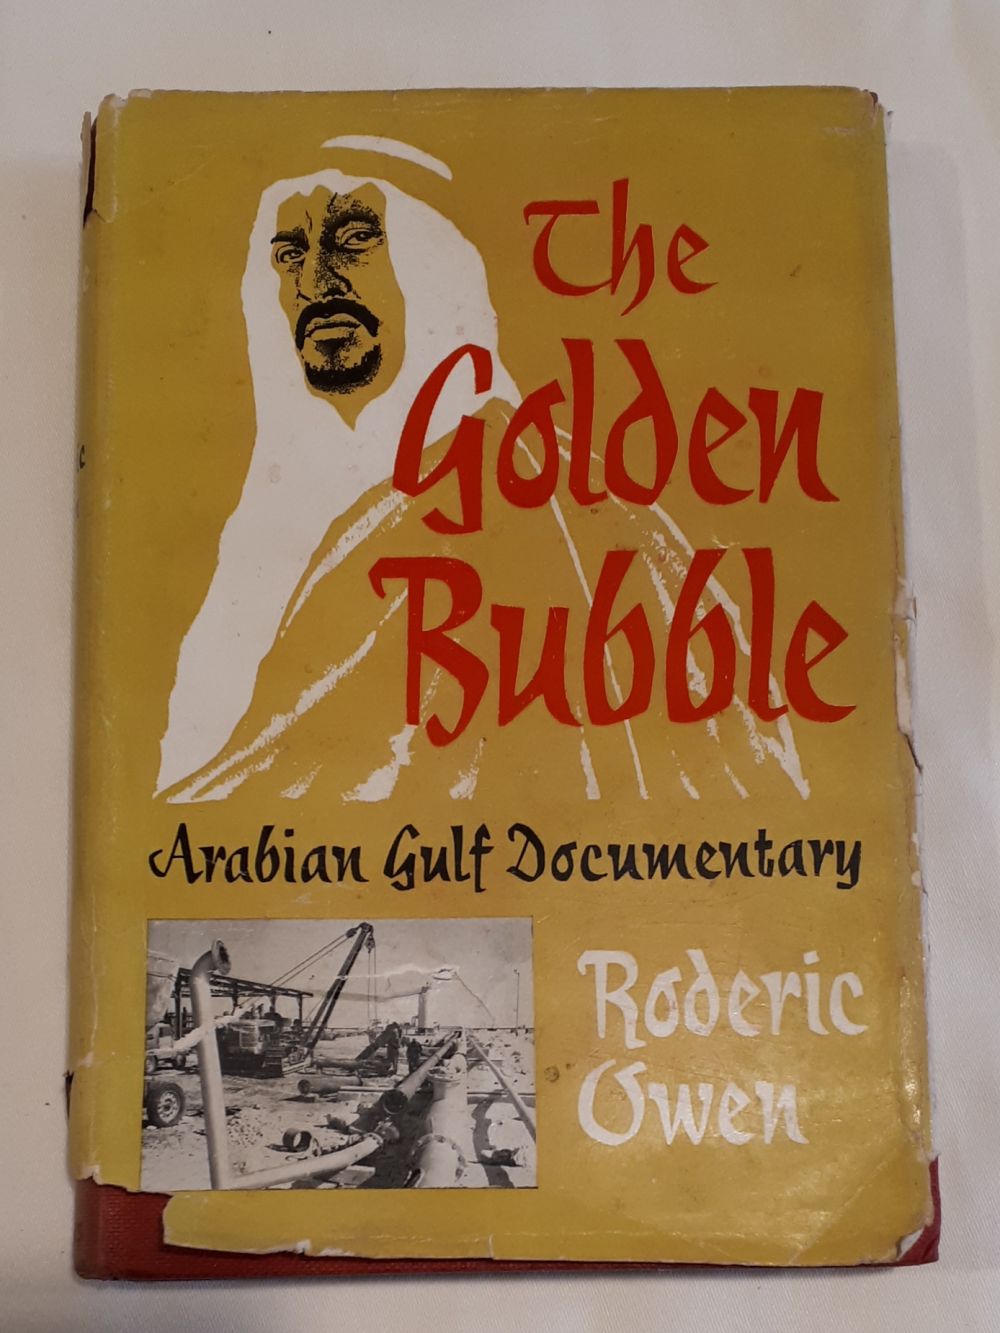 A MIXED BOOK LOT: Selection of books on the Middle East, includes Owen, Roderic, The Golden - Image 2 of 4